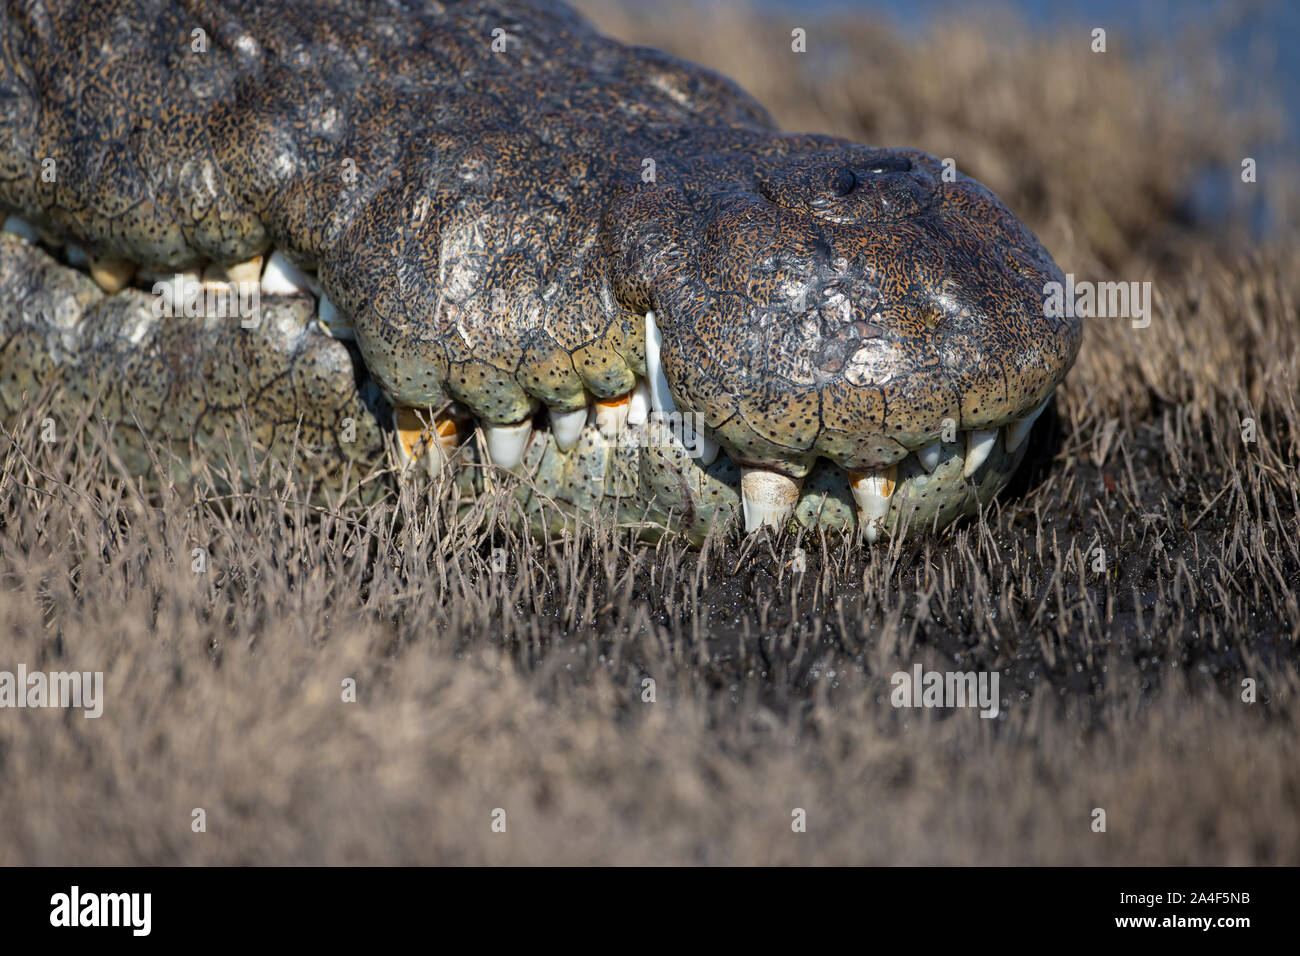 A close up of the snout and teeth of a large Nile Crocodile Crocodylus niloticus on the banks of the river Chobe in Botswana Stock Photo